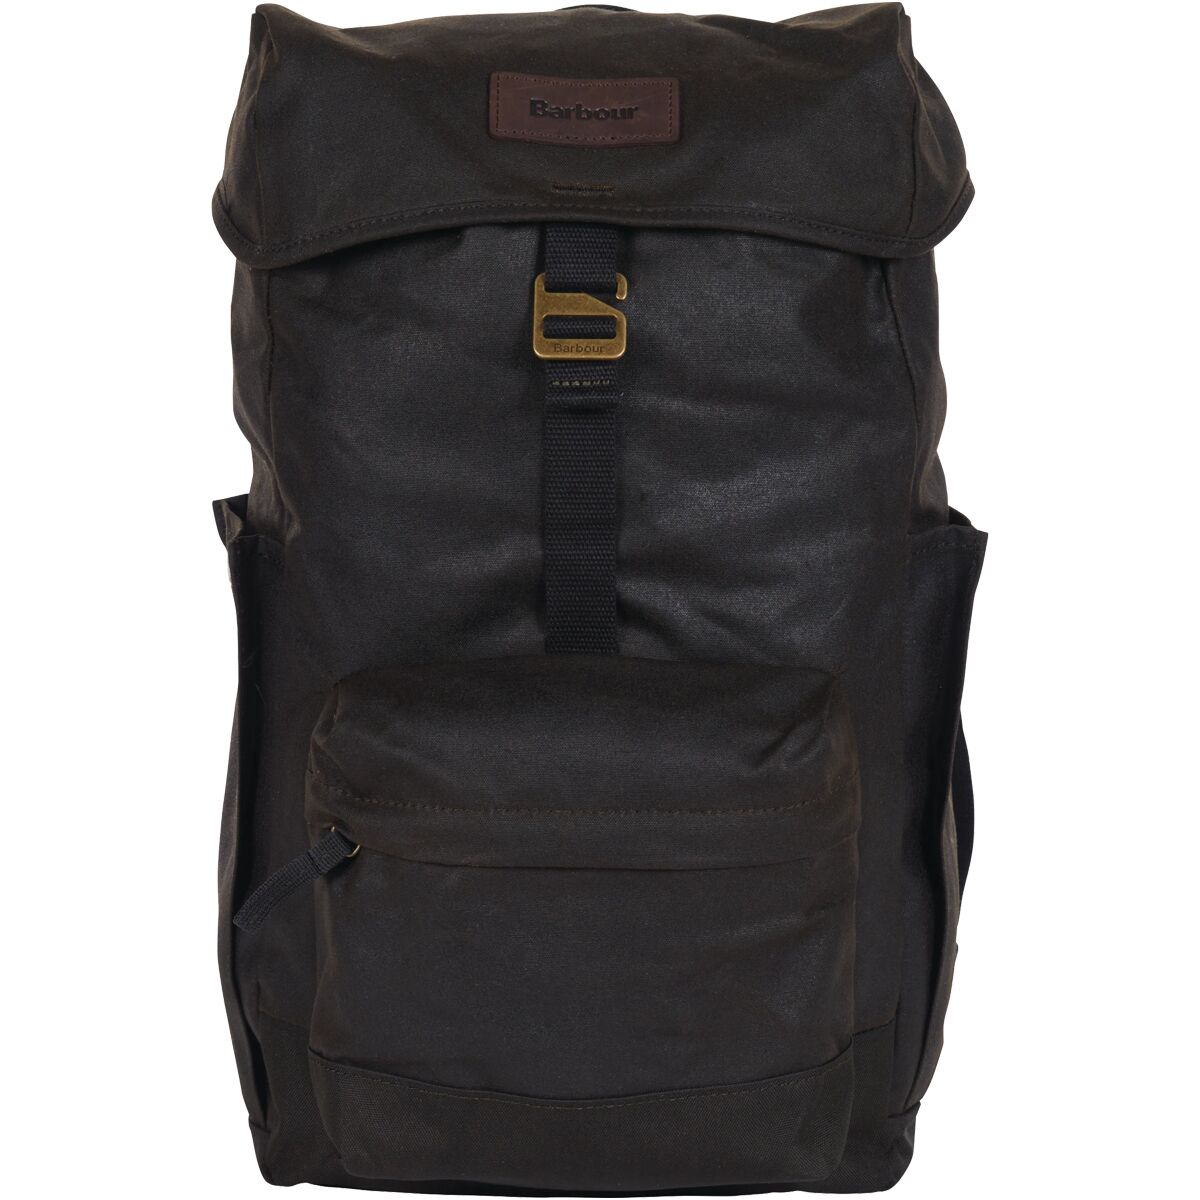 Photos - Backpack Barbour Essential Wax 14L  